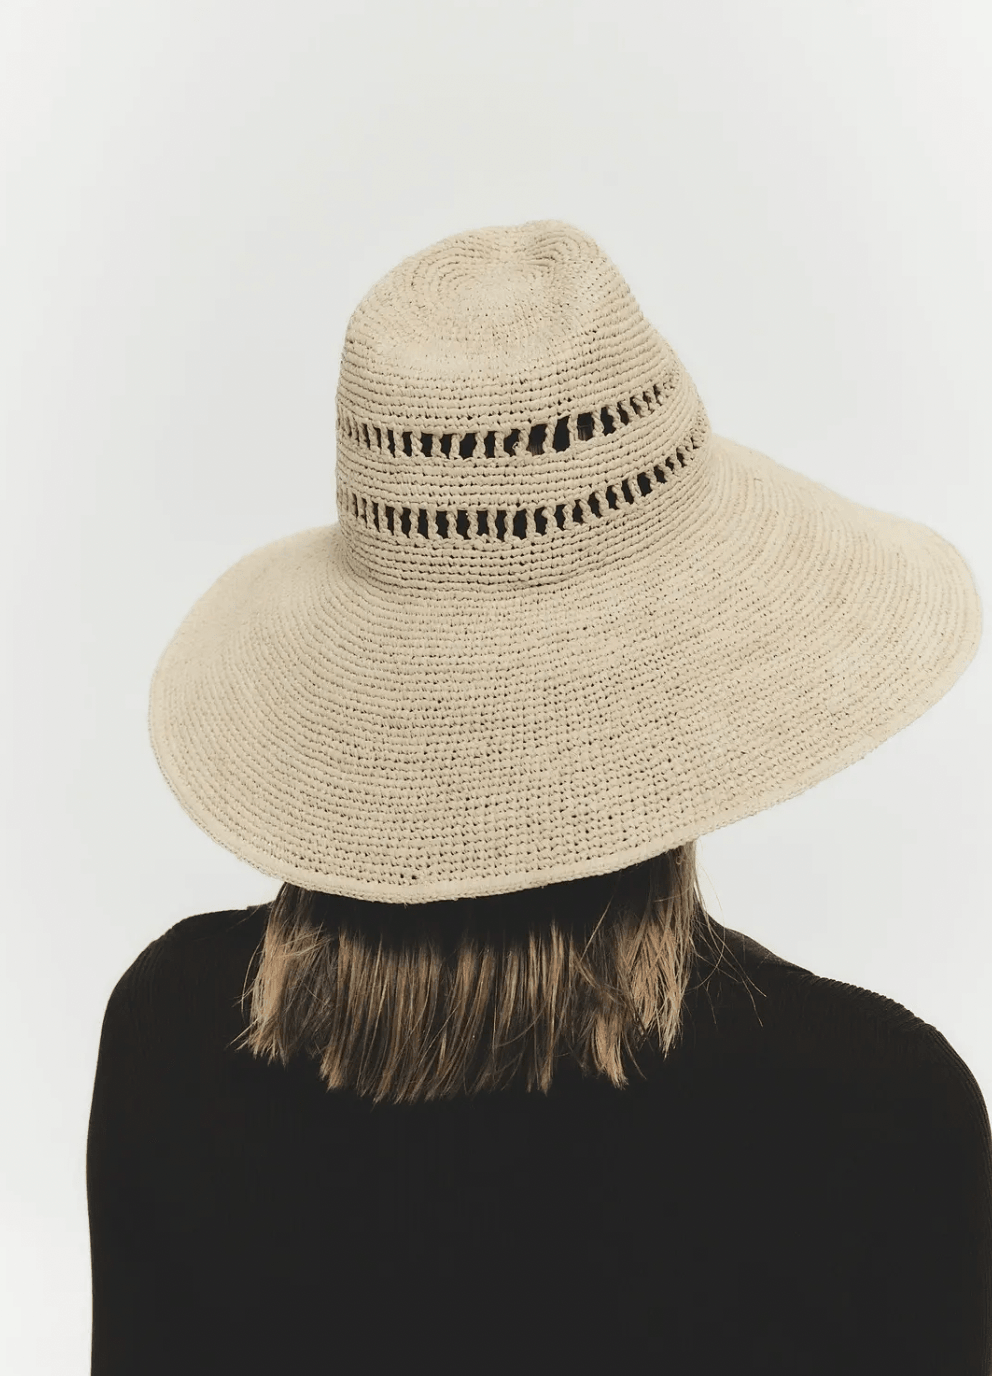 Harlow Hat by Janessa Leoné - Haven